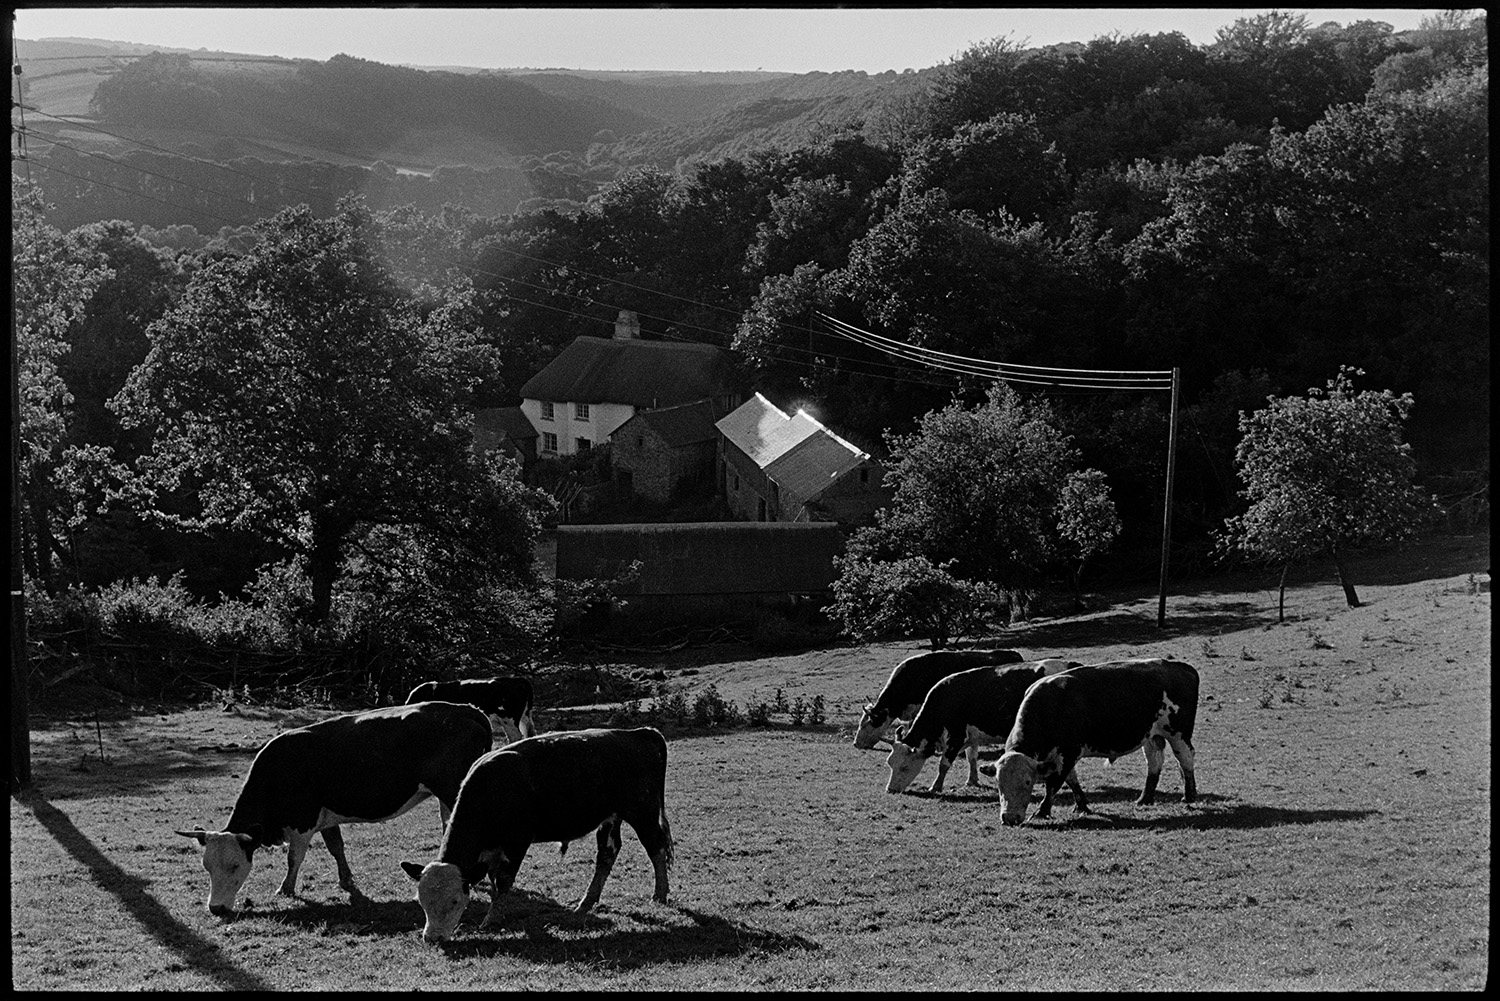 Thatched farm in valley. 
[Cattle grazing in a field at Ashwell, Dolton. A thatched farmhouse surrounded by trees can be seen in the valley in the background.]